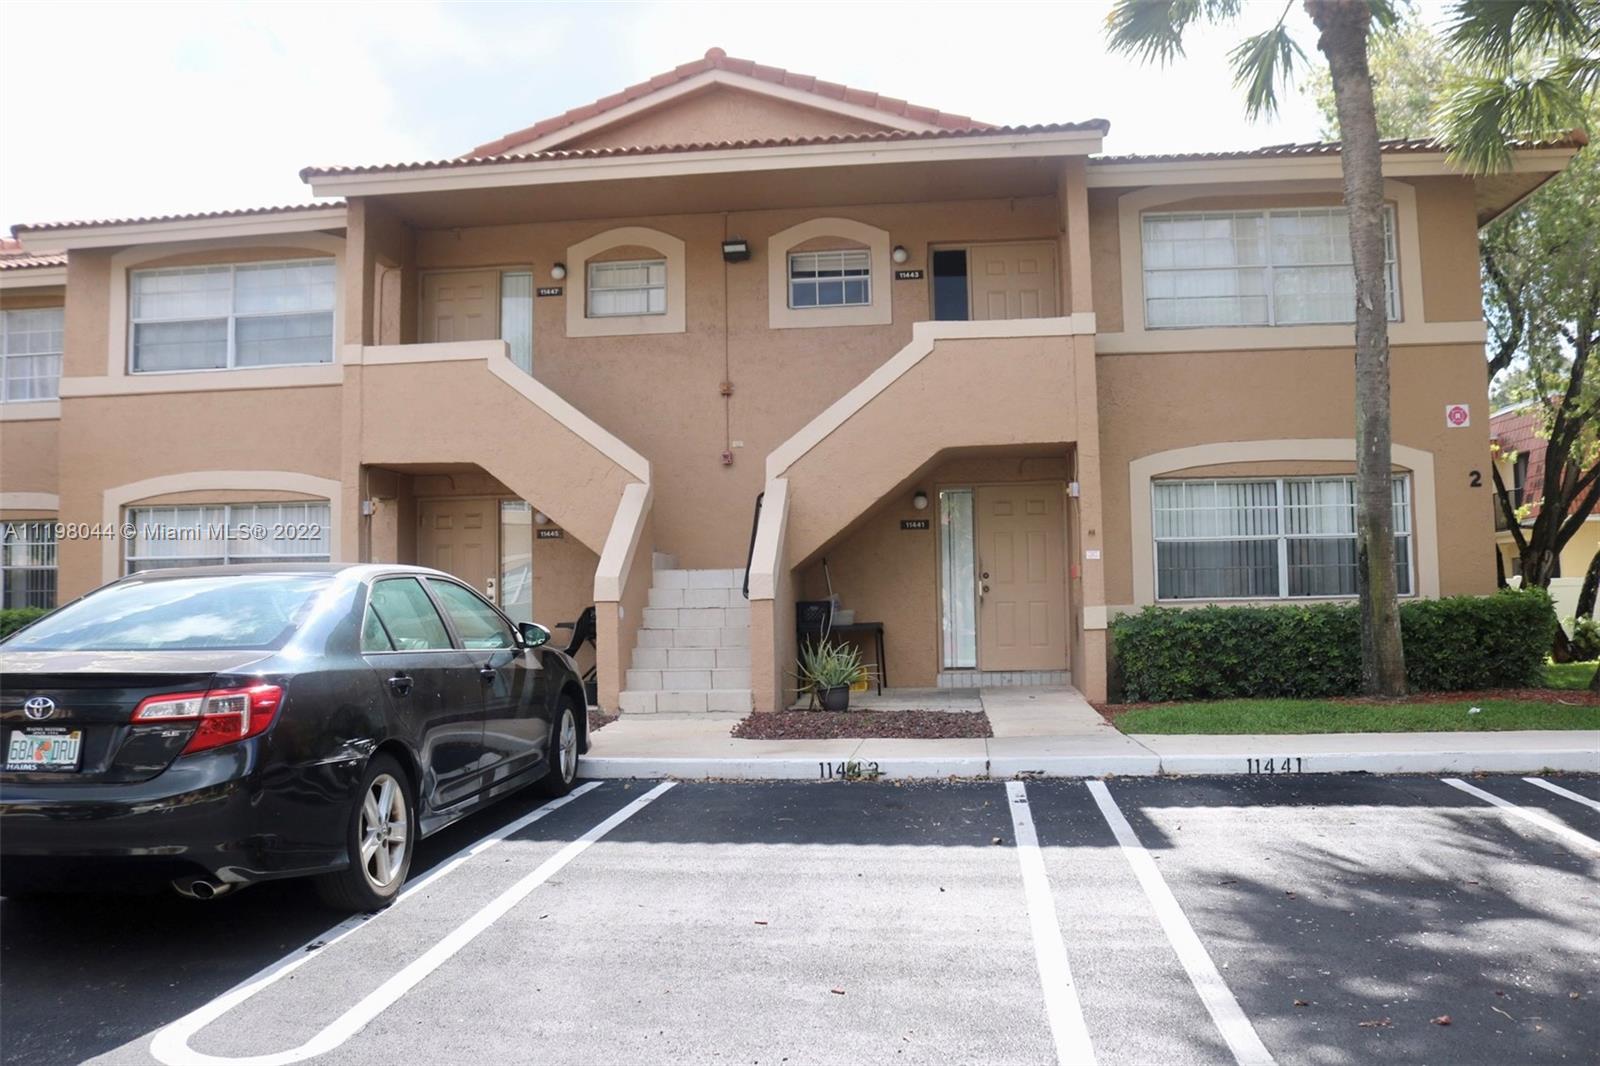 11447 NW 42nd St 11447, Coral Springs, FL 33065